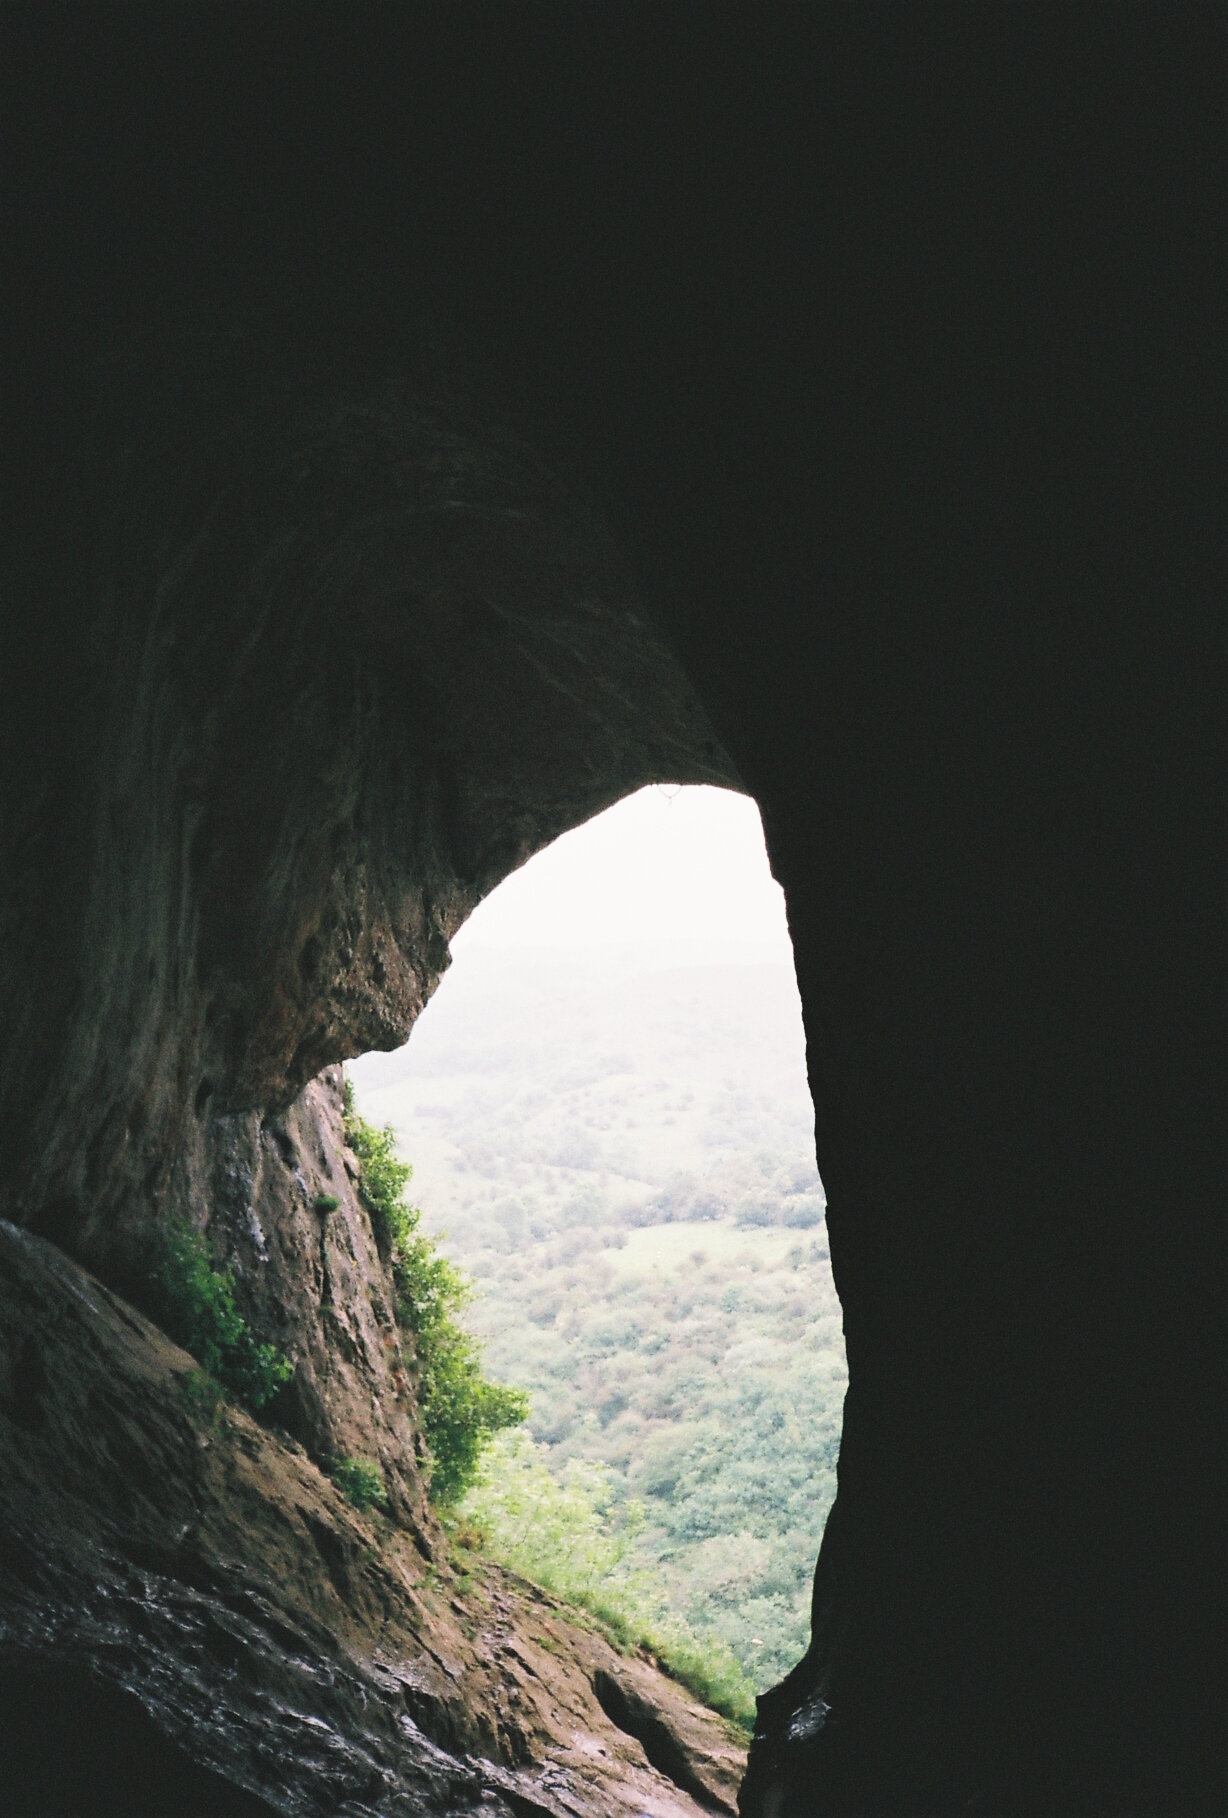  Thor's Cave 35mm, 2019 